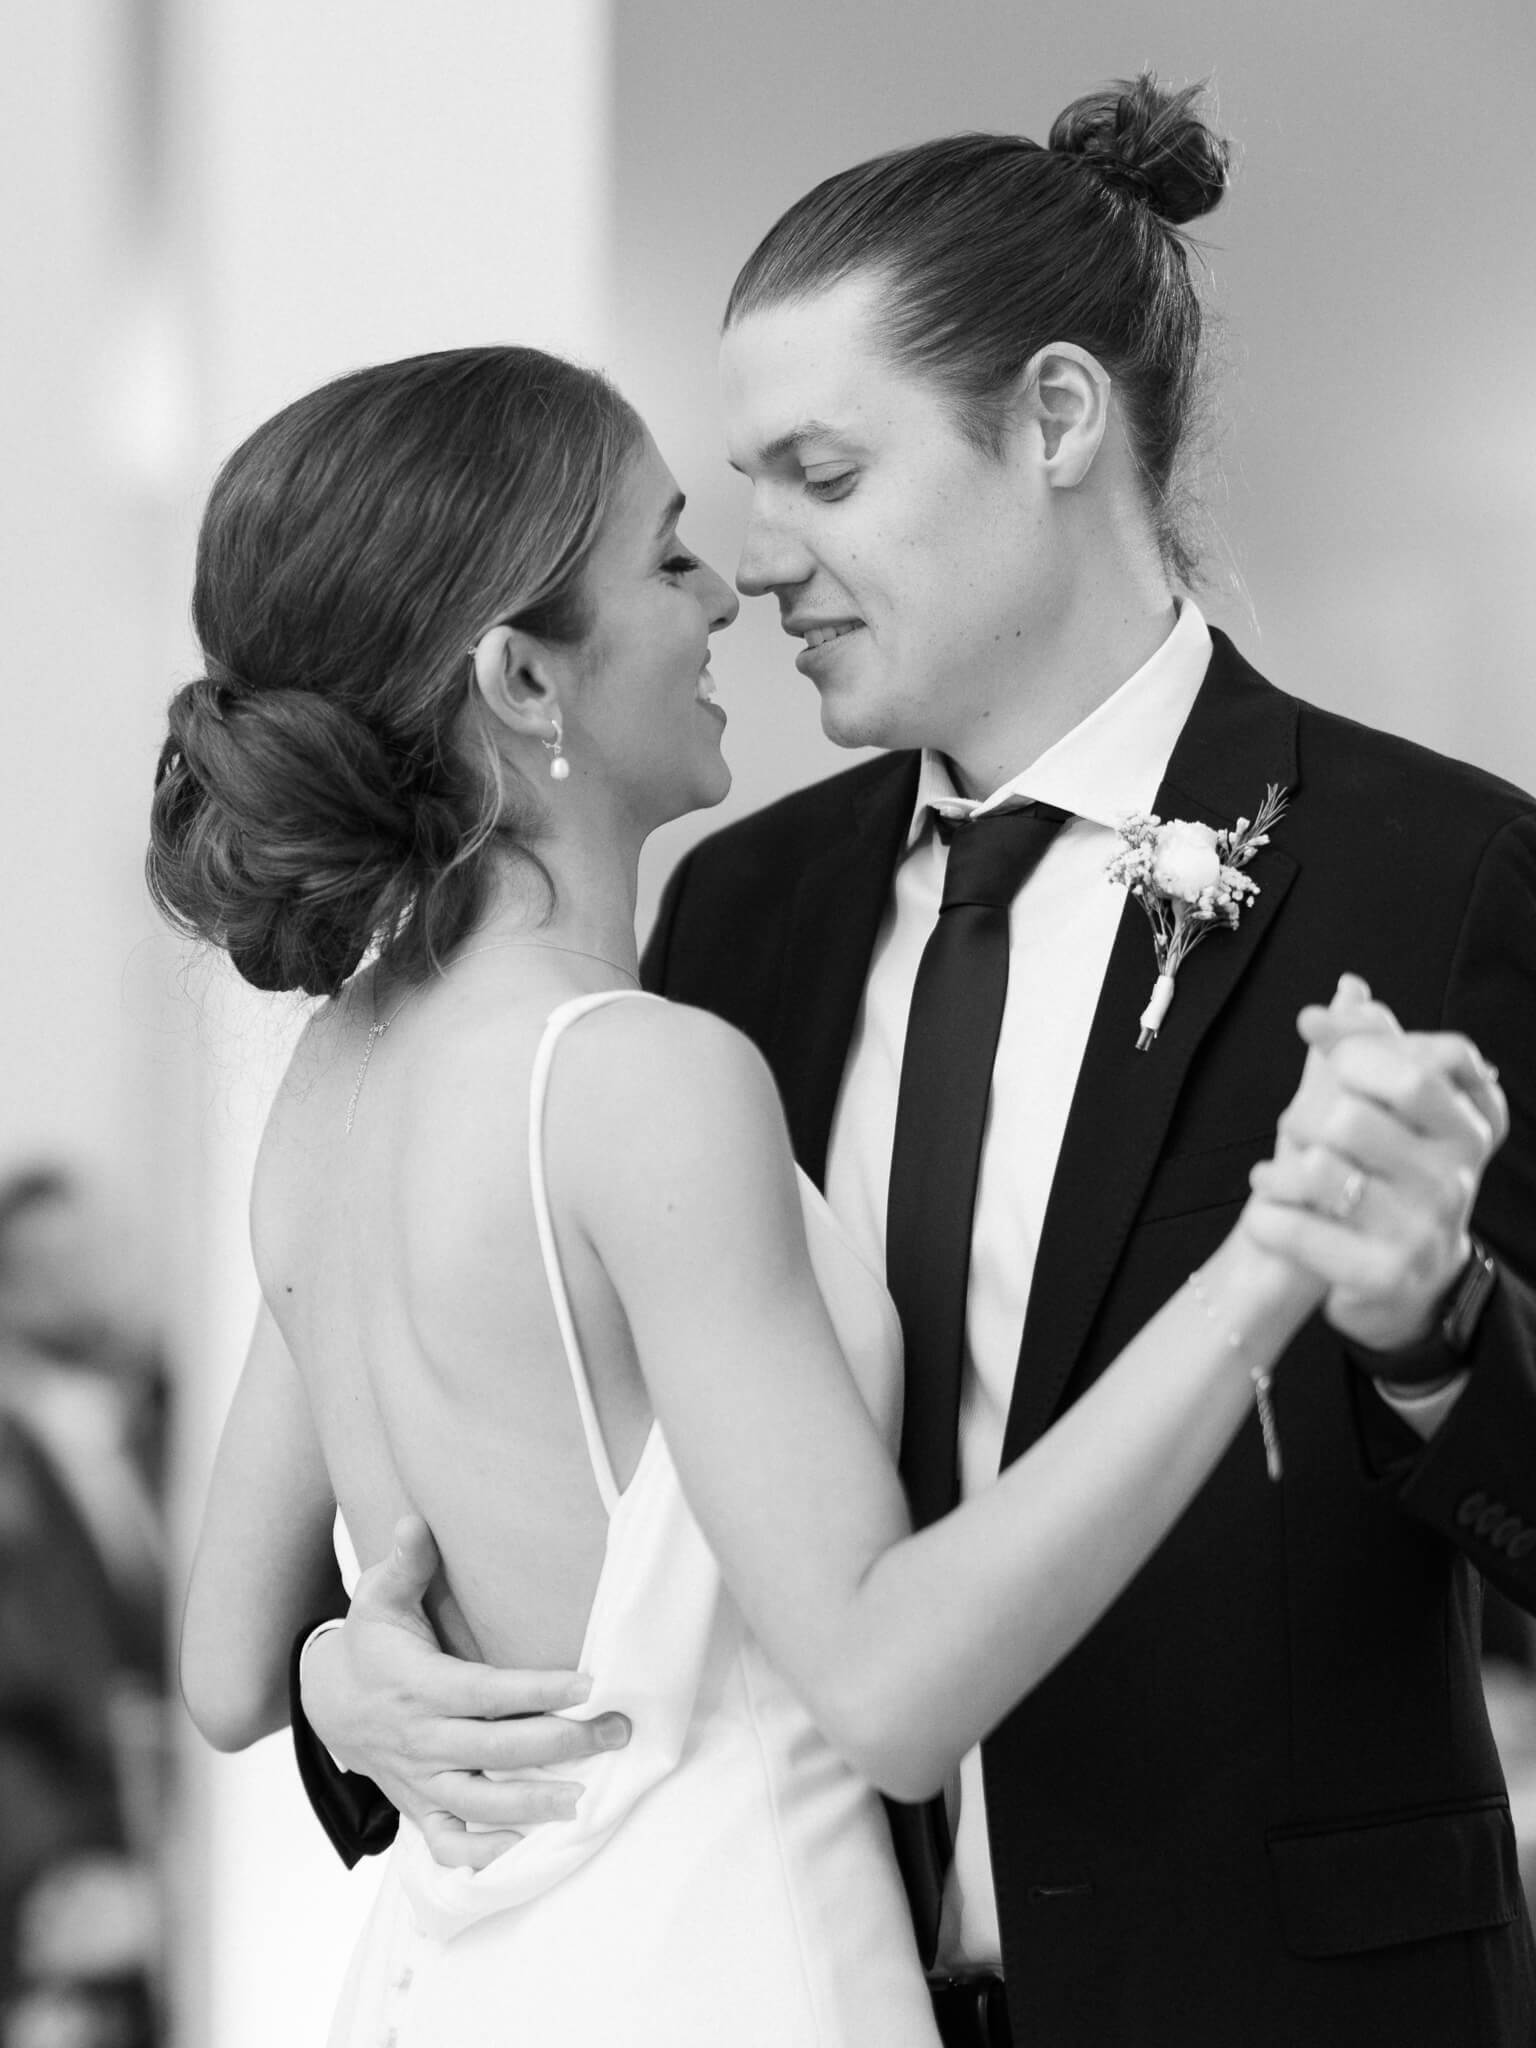 Close-up black and white image of a bride and groom smiling at each other during their first dance.